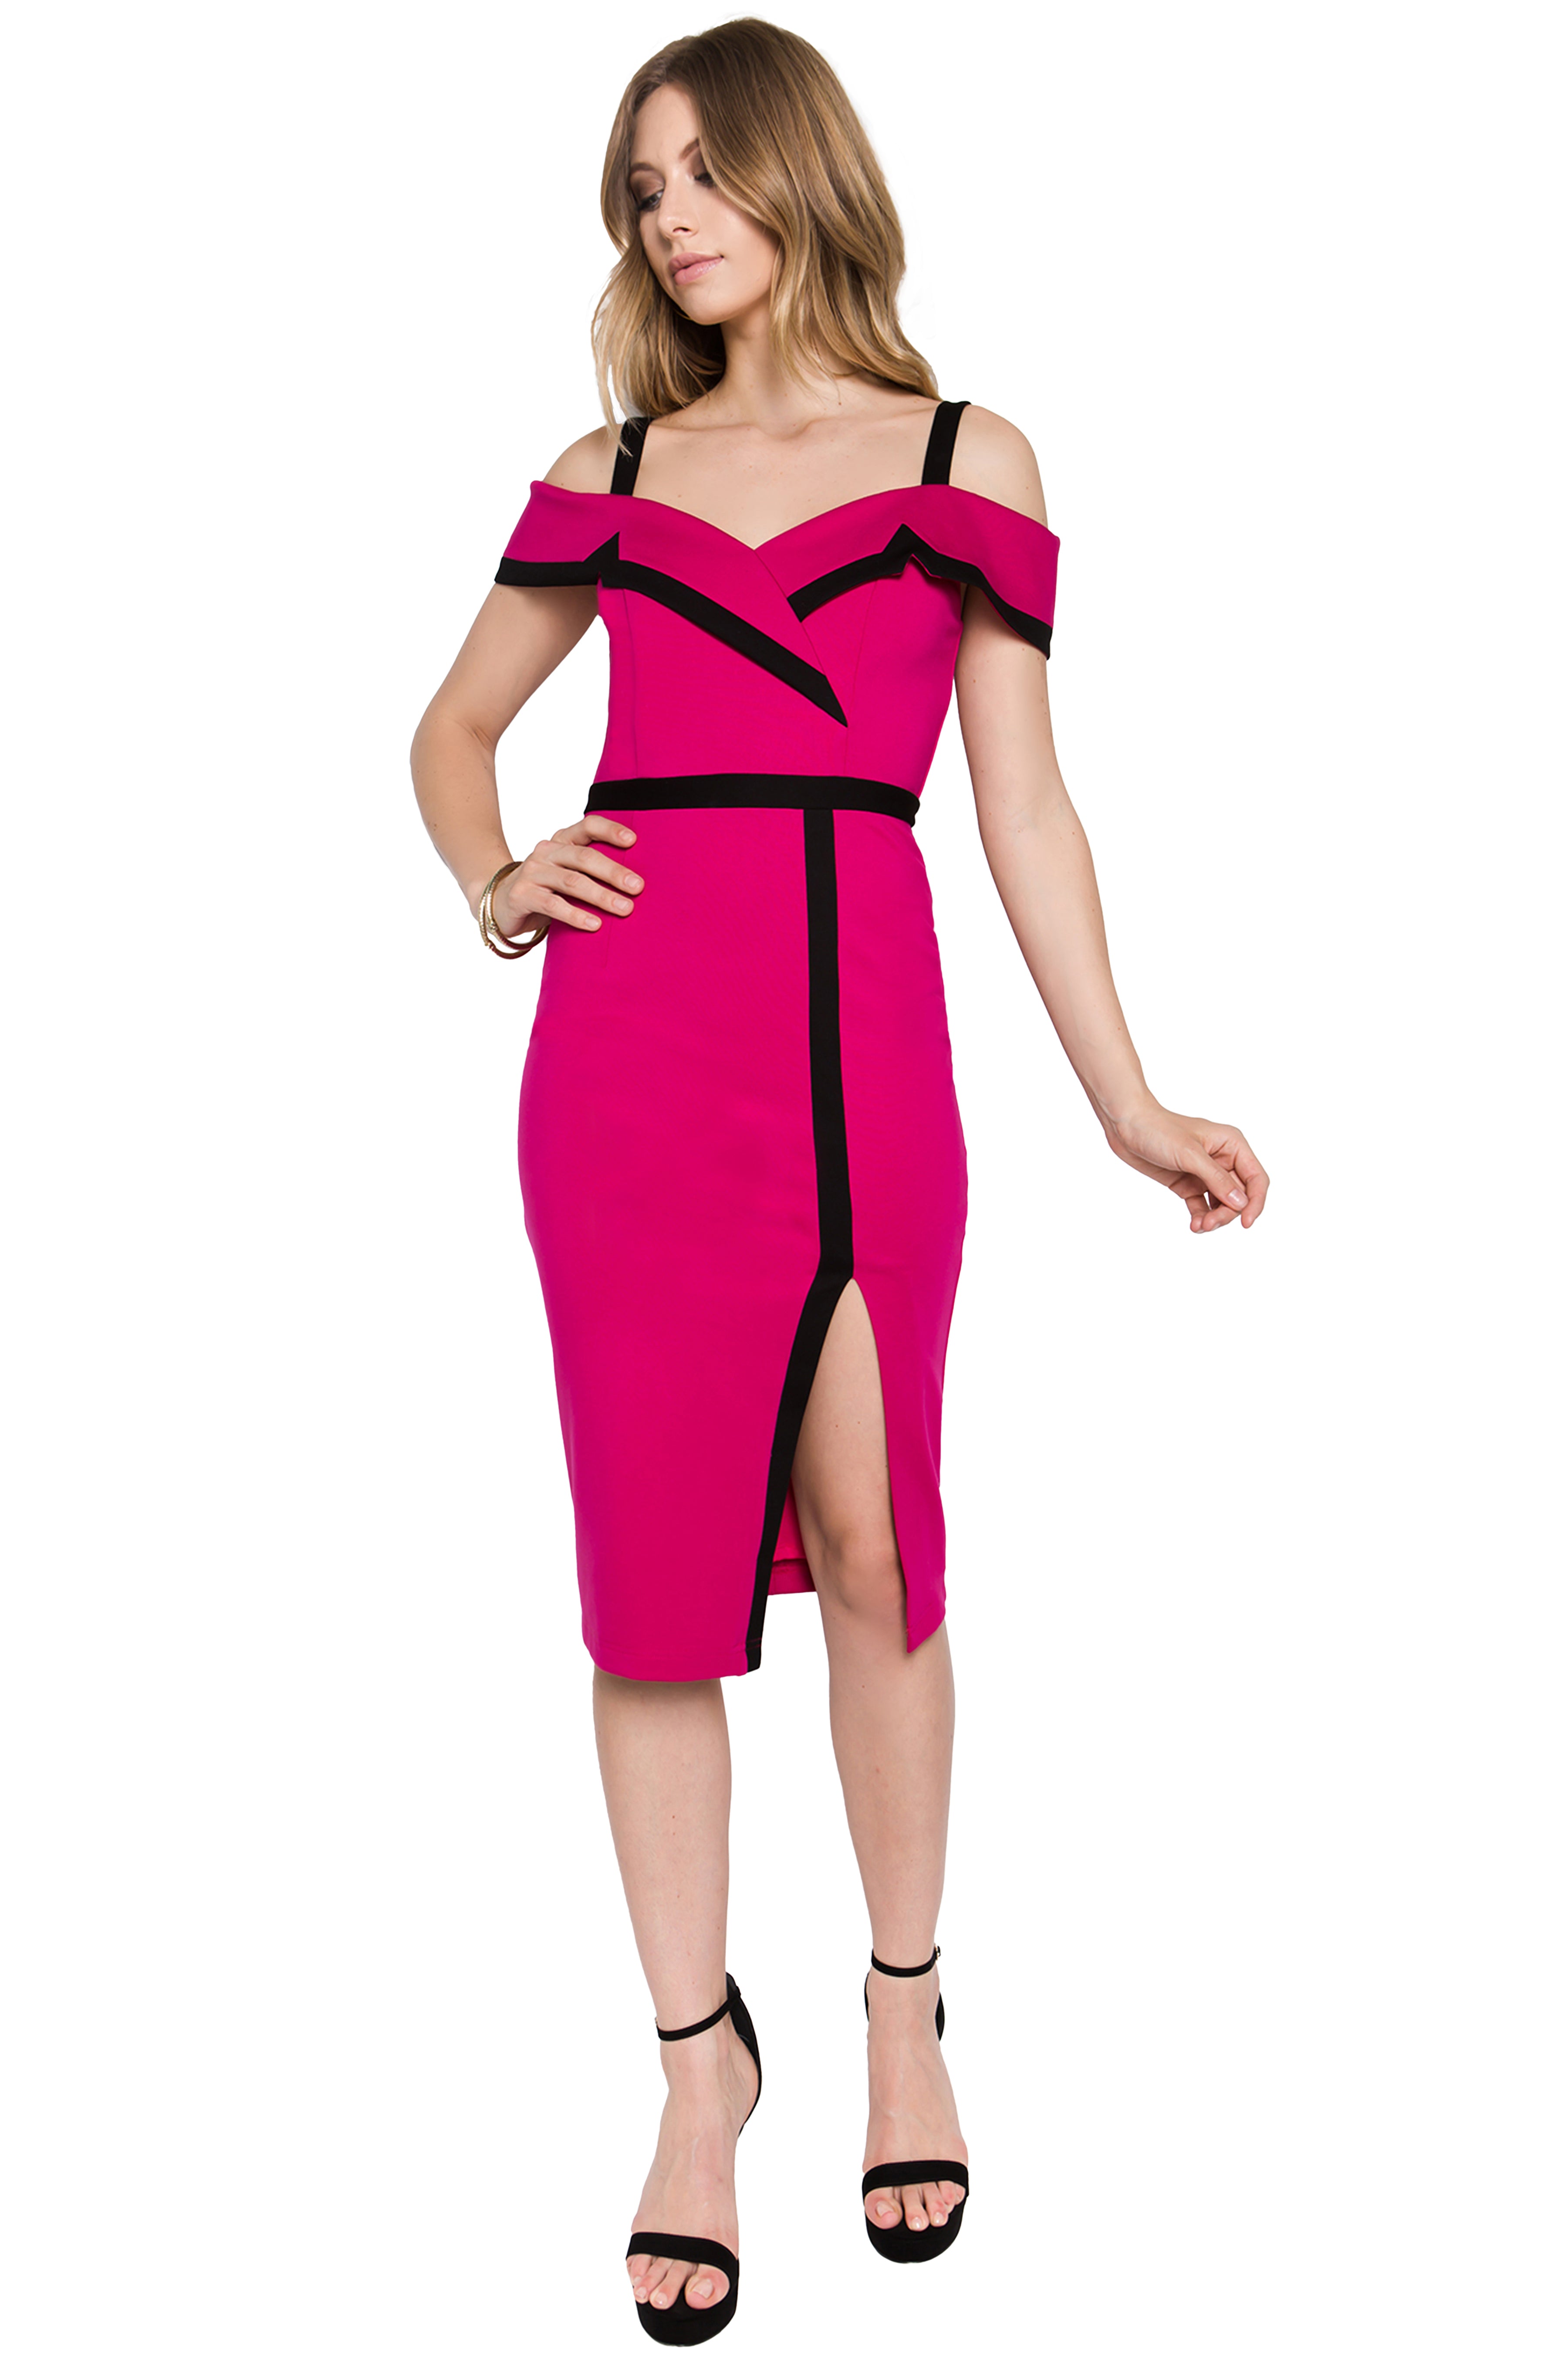 Front view of model wearing the Simona Maghen Olivia Dress, berry/black color block off the shoulder knit Ponte midi dress with notch lapel and thigh high slit.